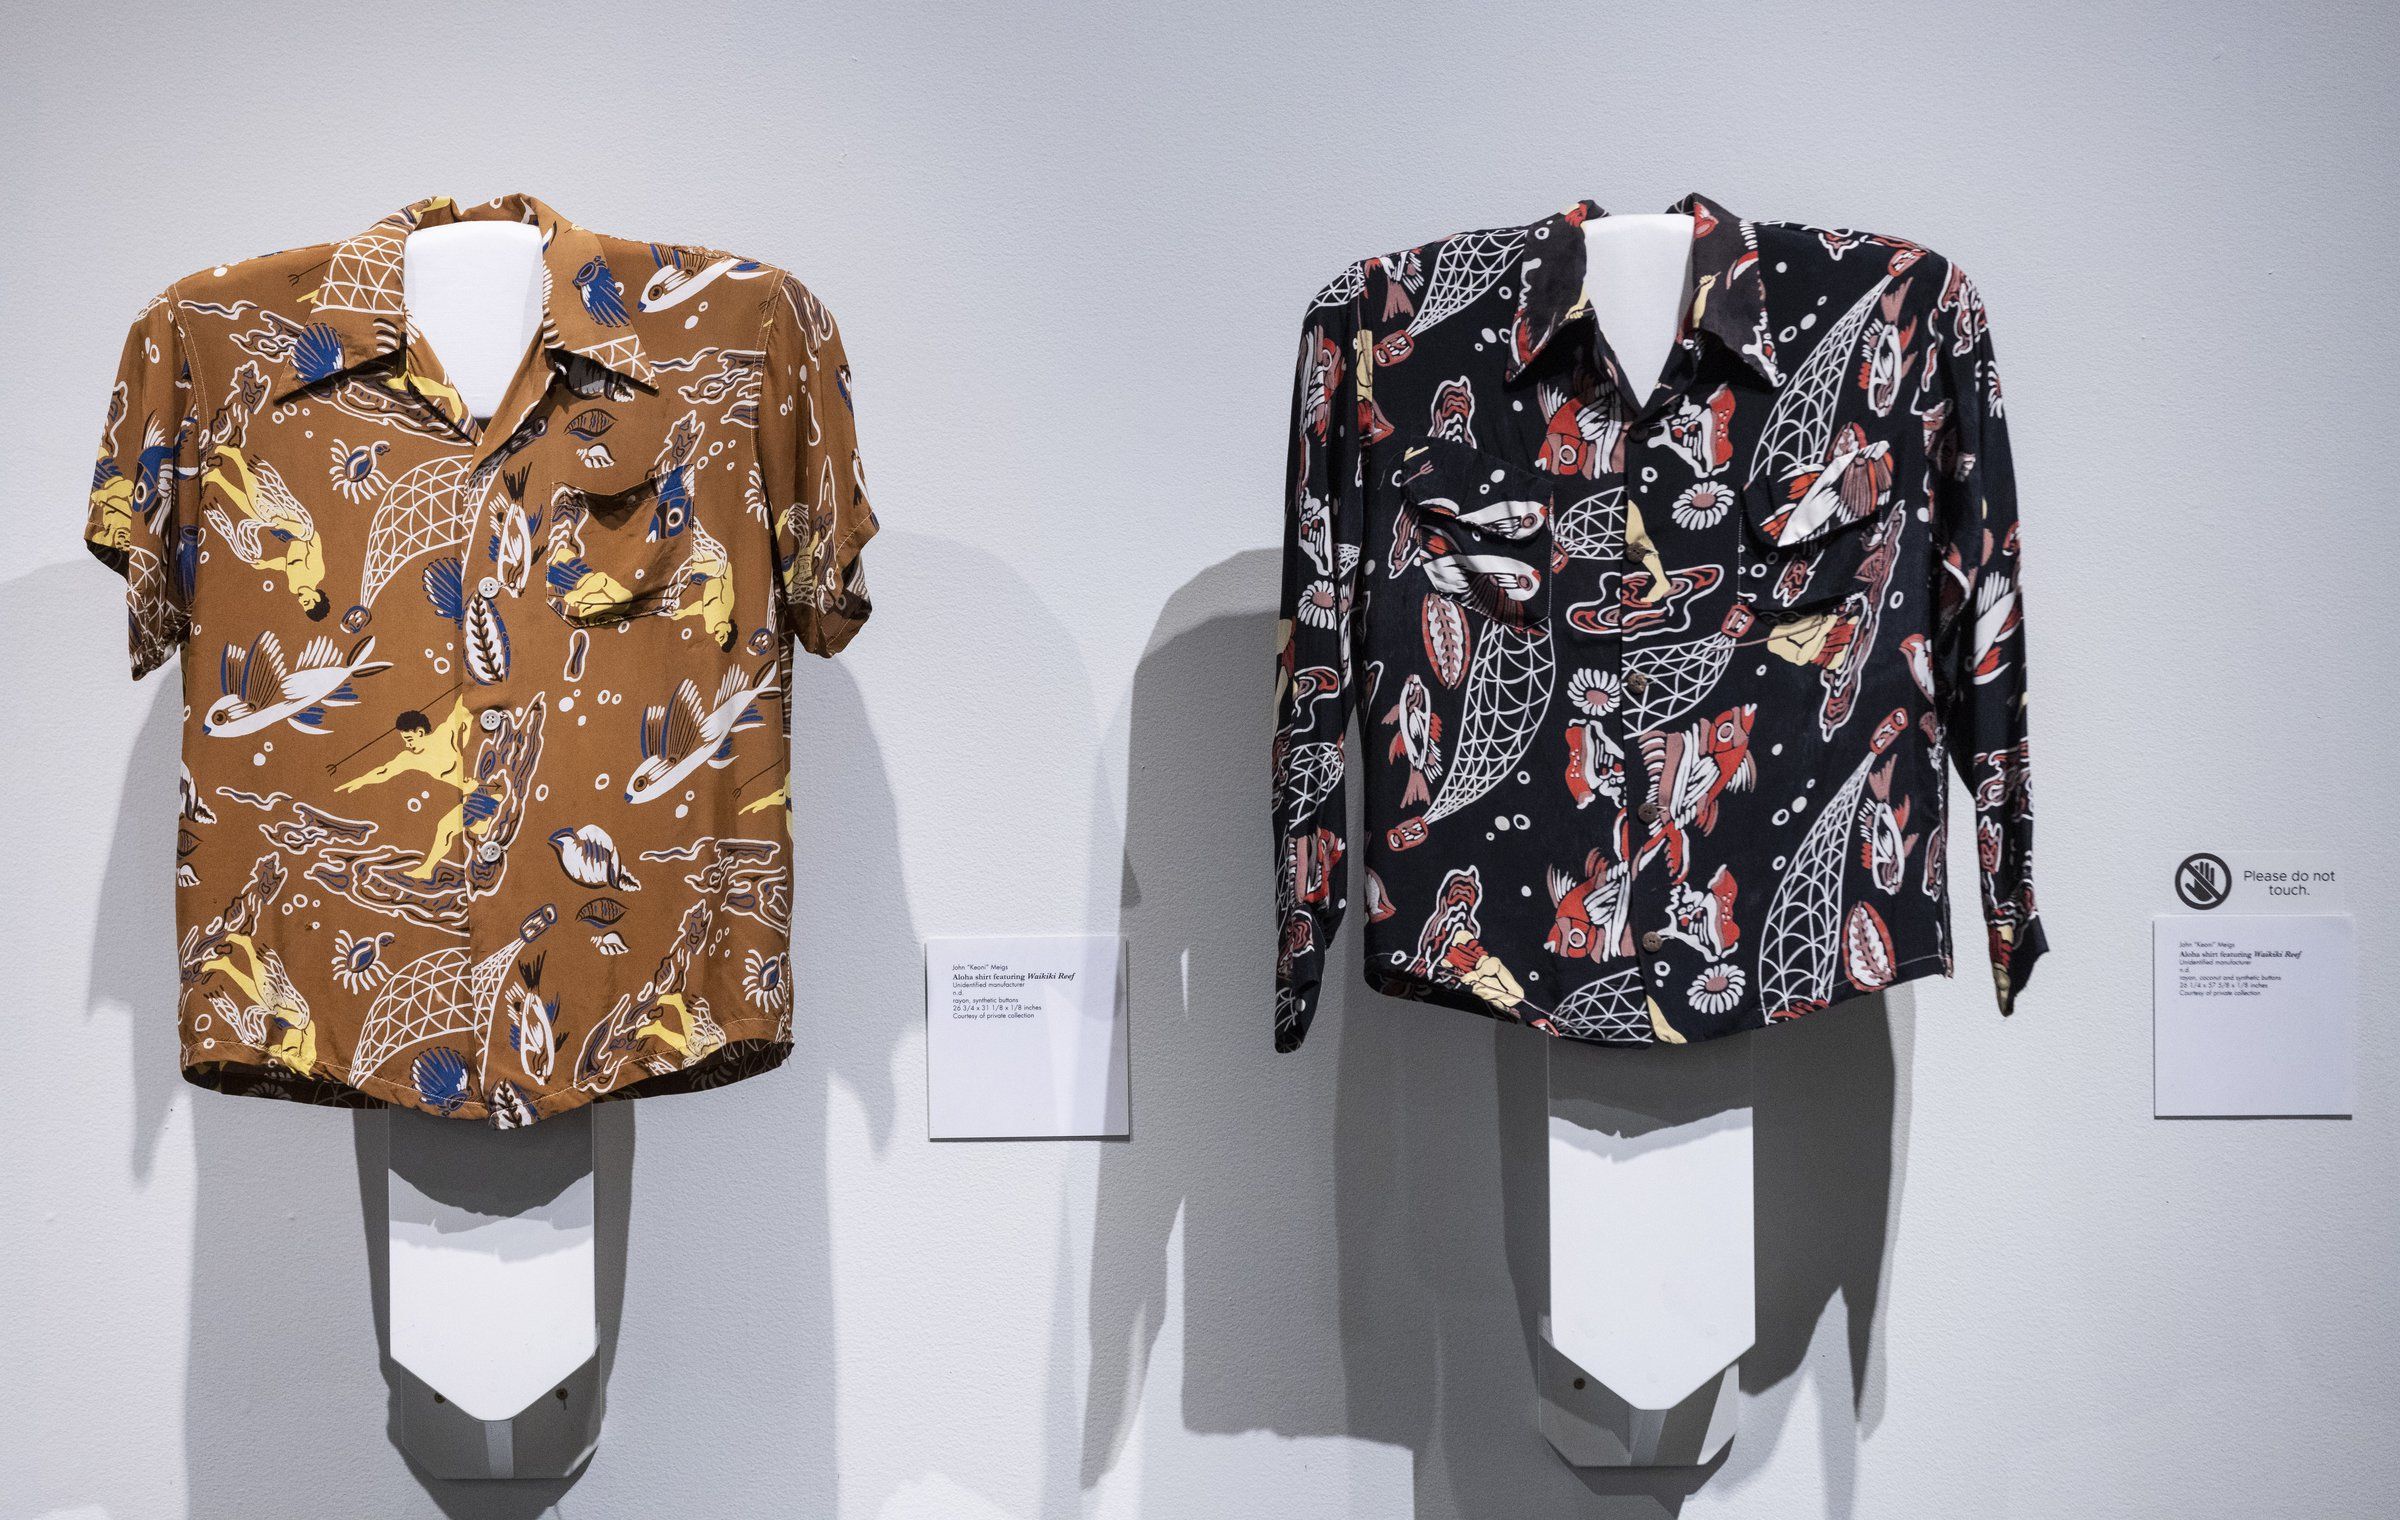 The Aloha shirt provides significance — and freedom | The Seattle